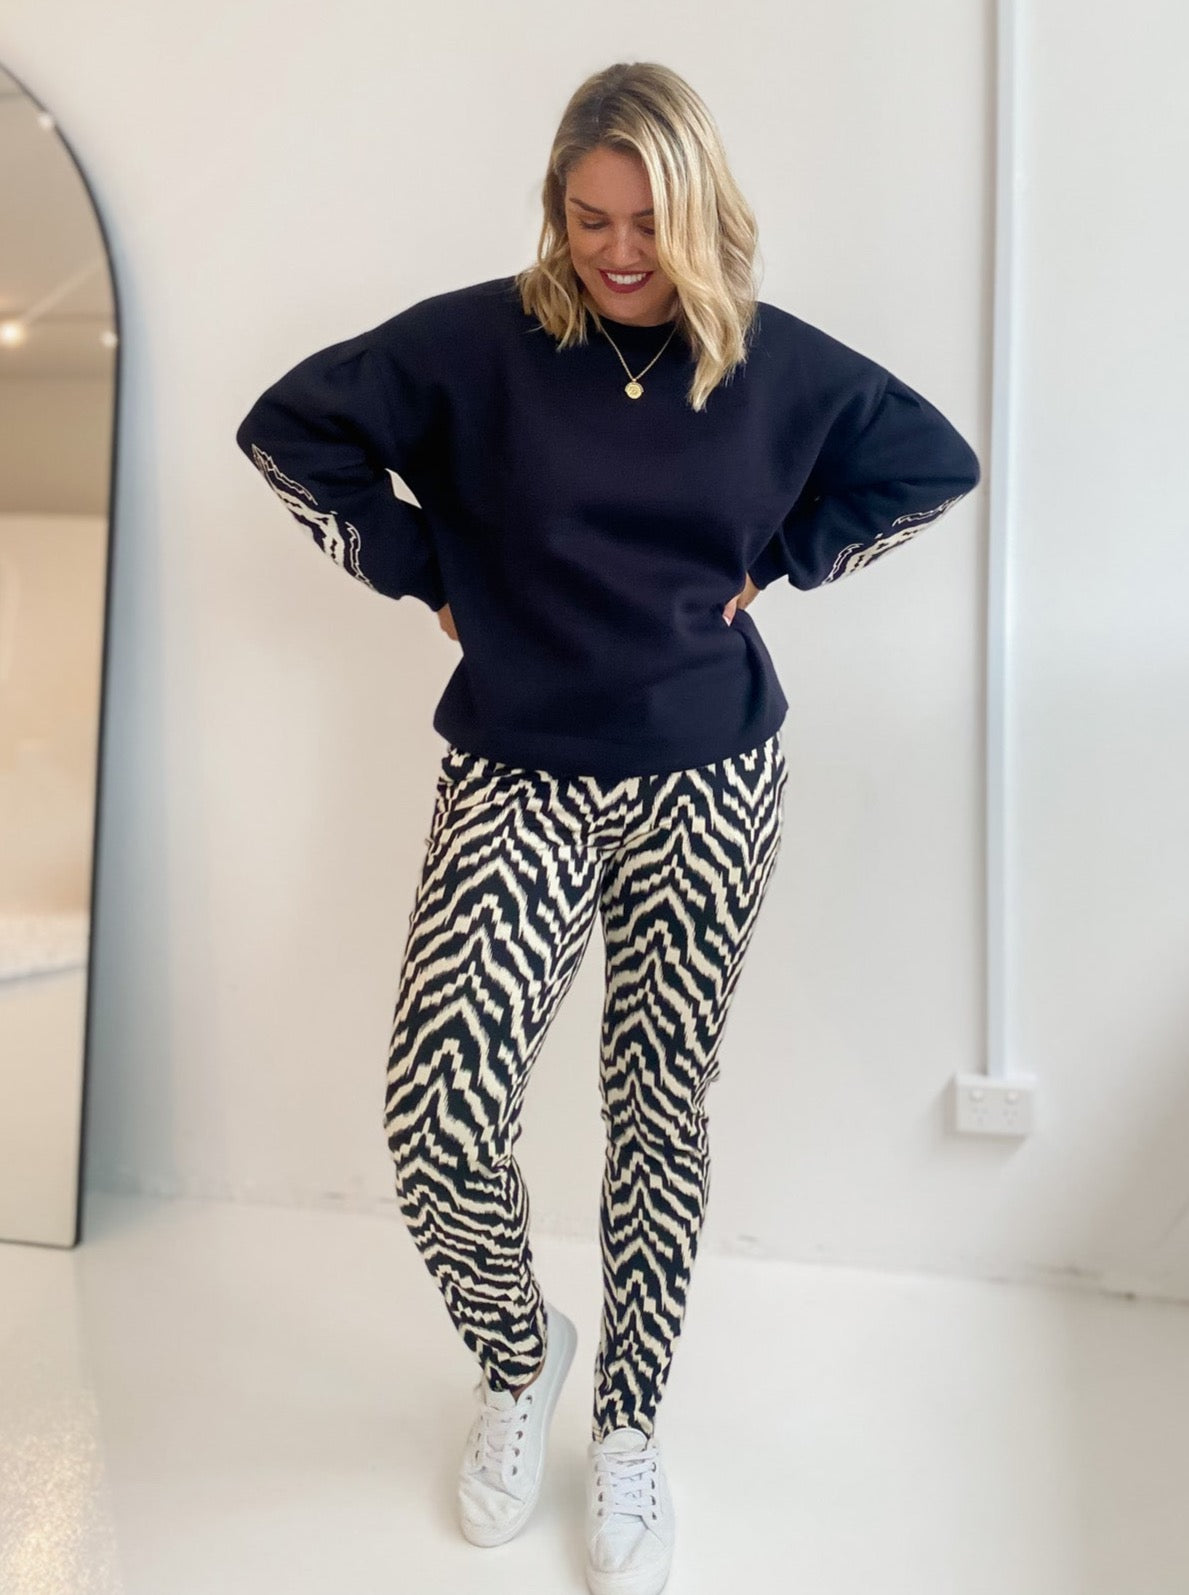 ANDCO WOMAN DELLY PANT